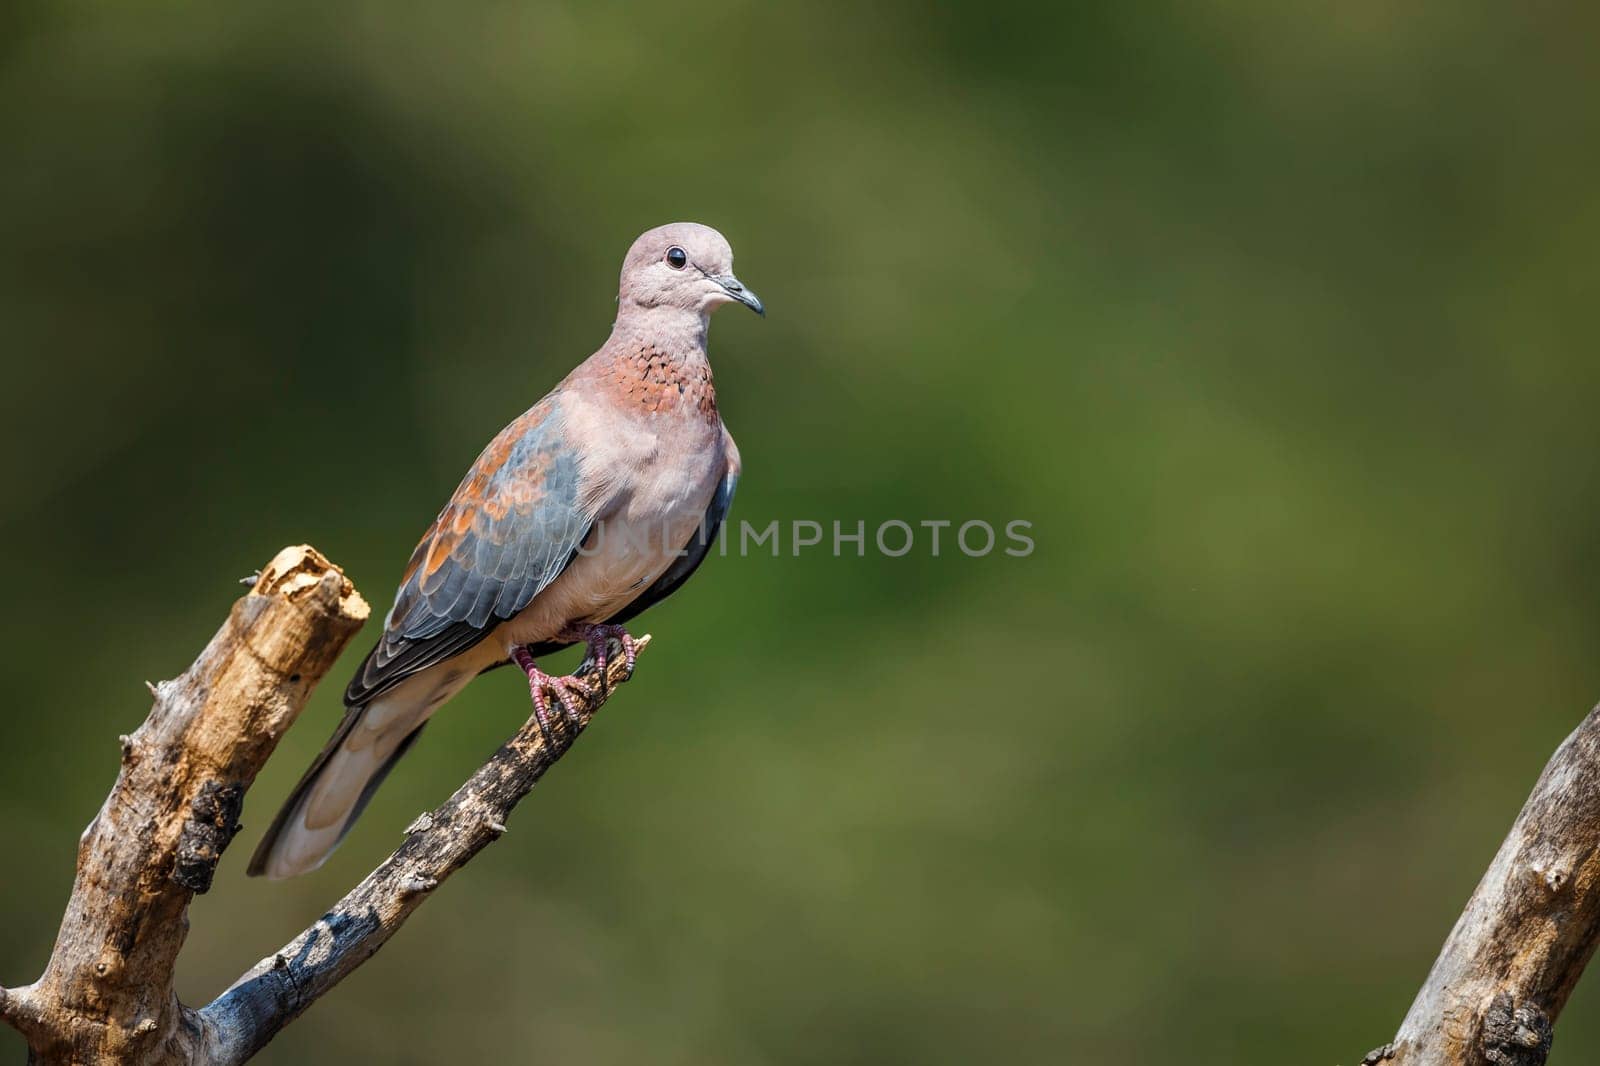 Laughing dove in Kruger National park, South Africa by PACOCOMO